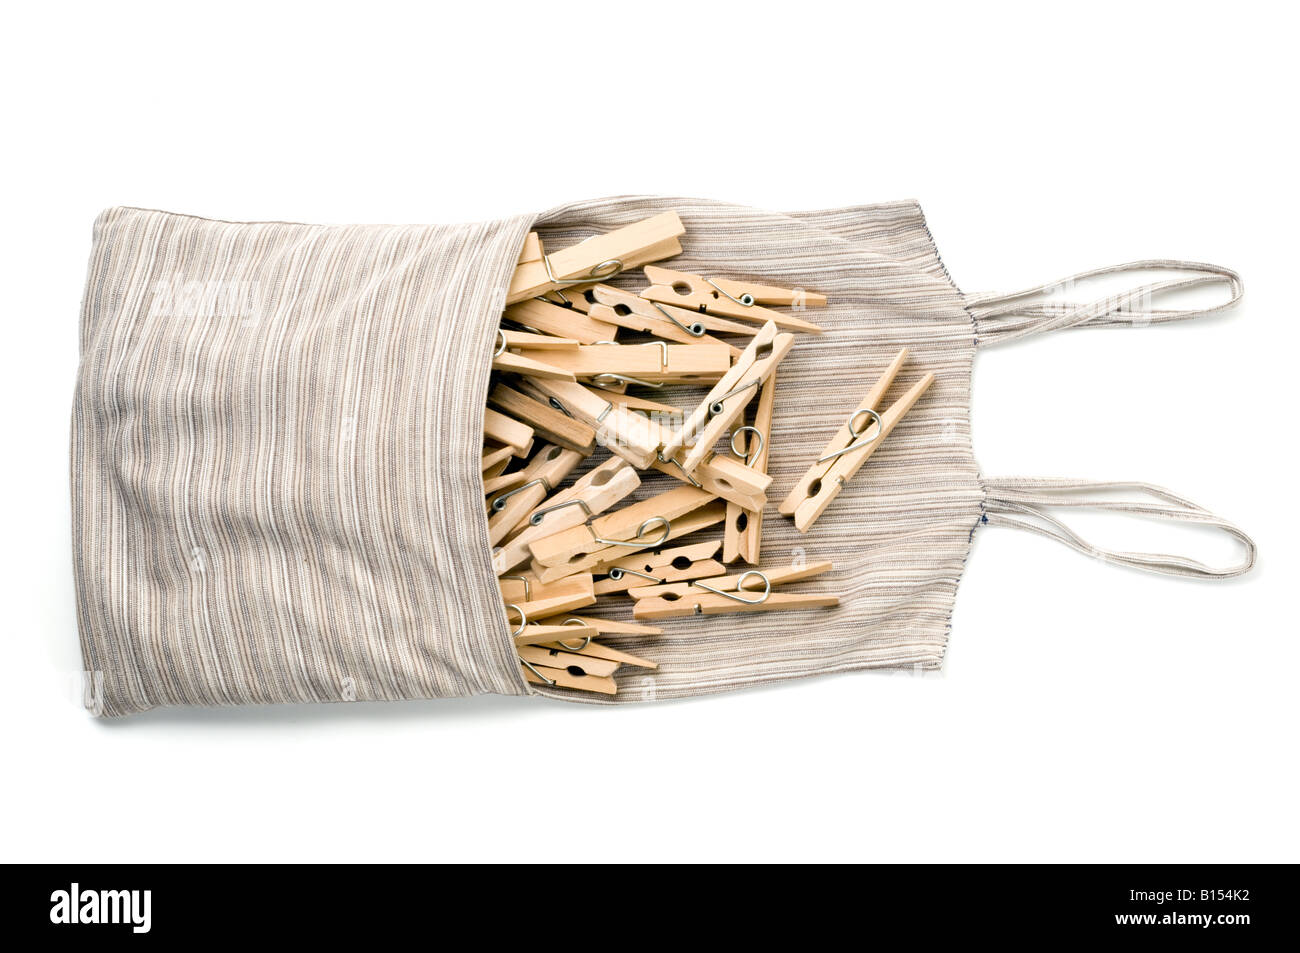 Wooden clothes pegs in a homemade cloth bag Stock Photo